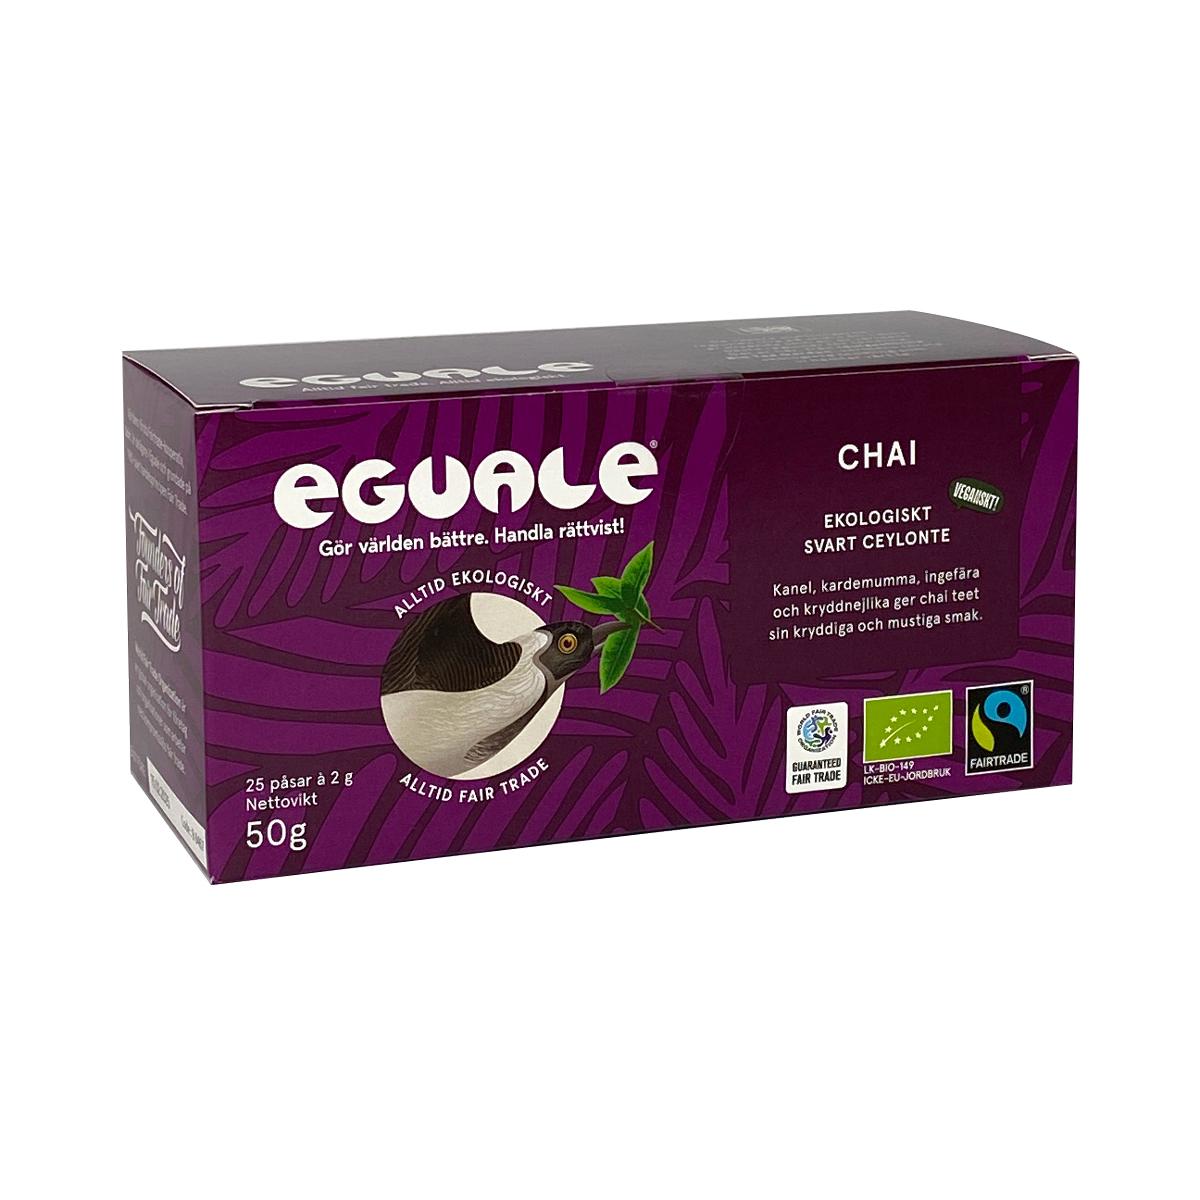 Eguale's Eguale chai